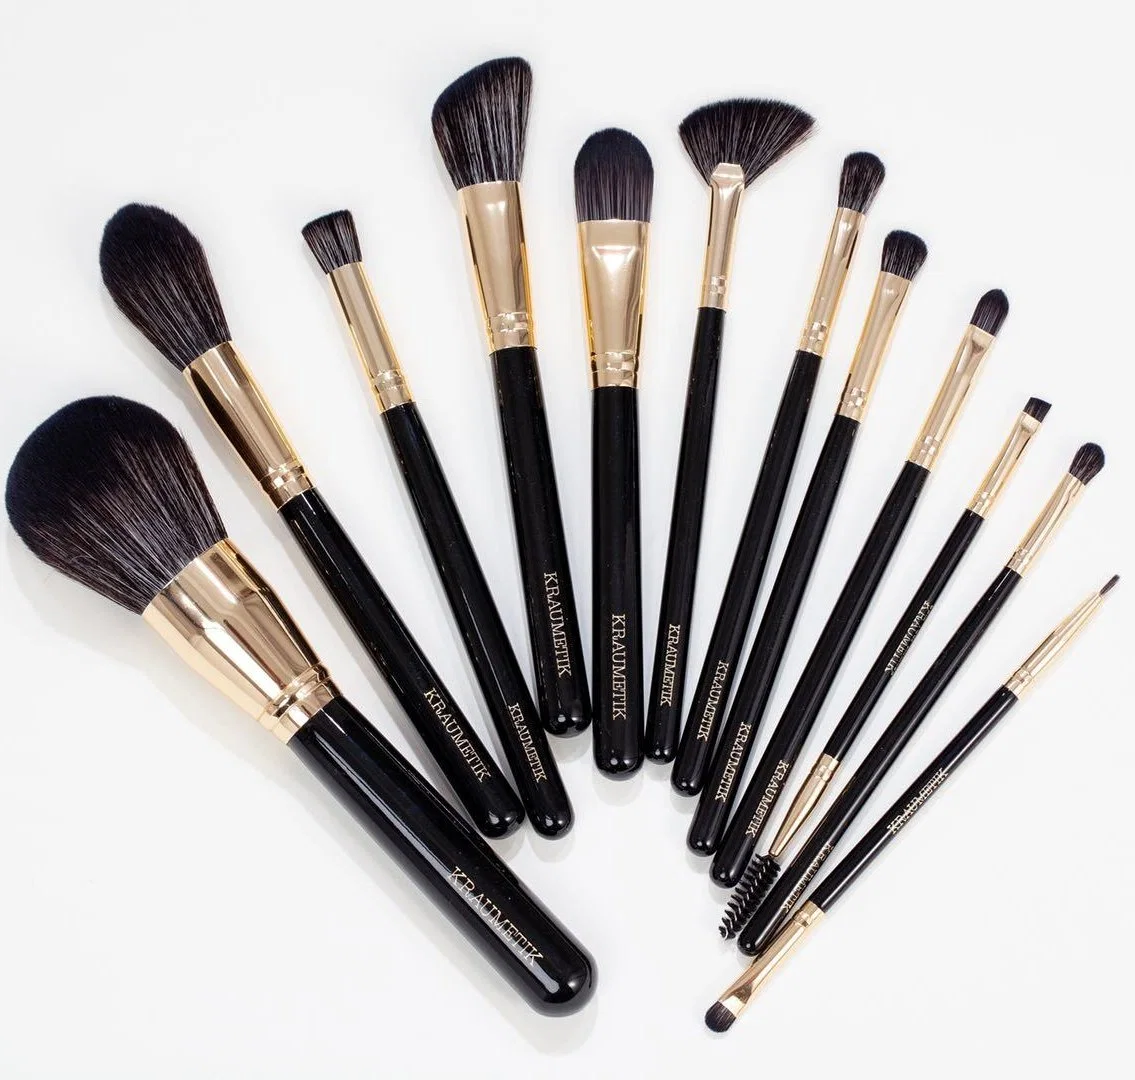 Wholesale Private Brand Make up Brushes Beauty Makeup Cosmetic Powder Foundation Brush with Leather Case